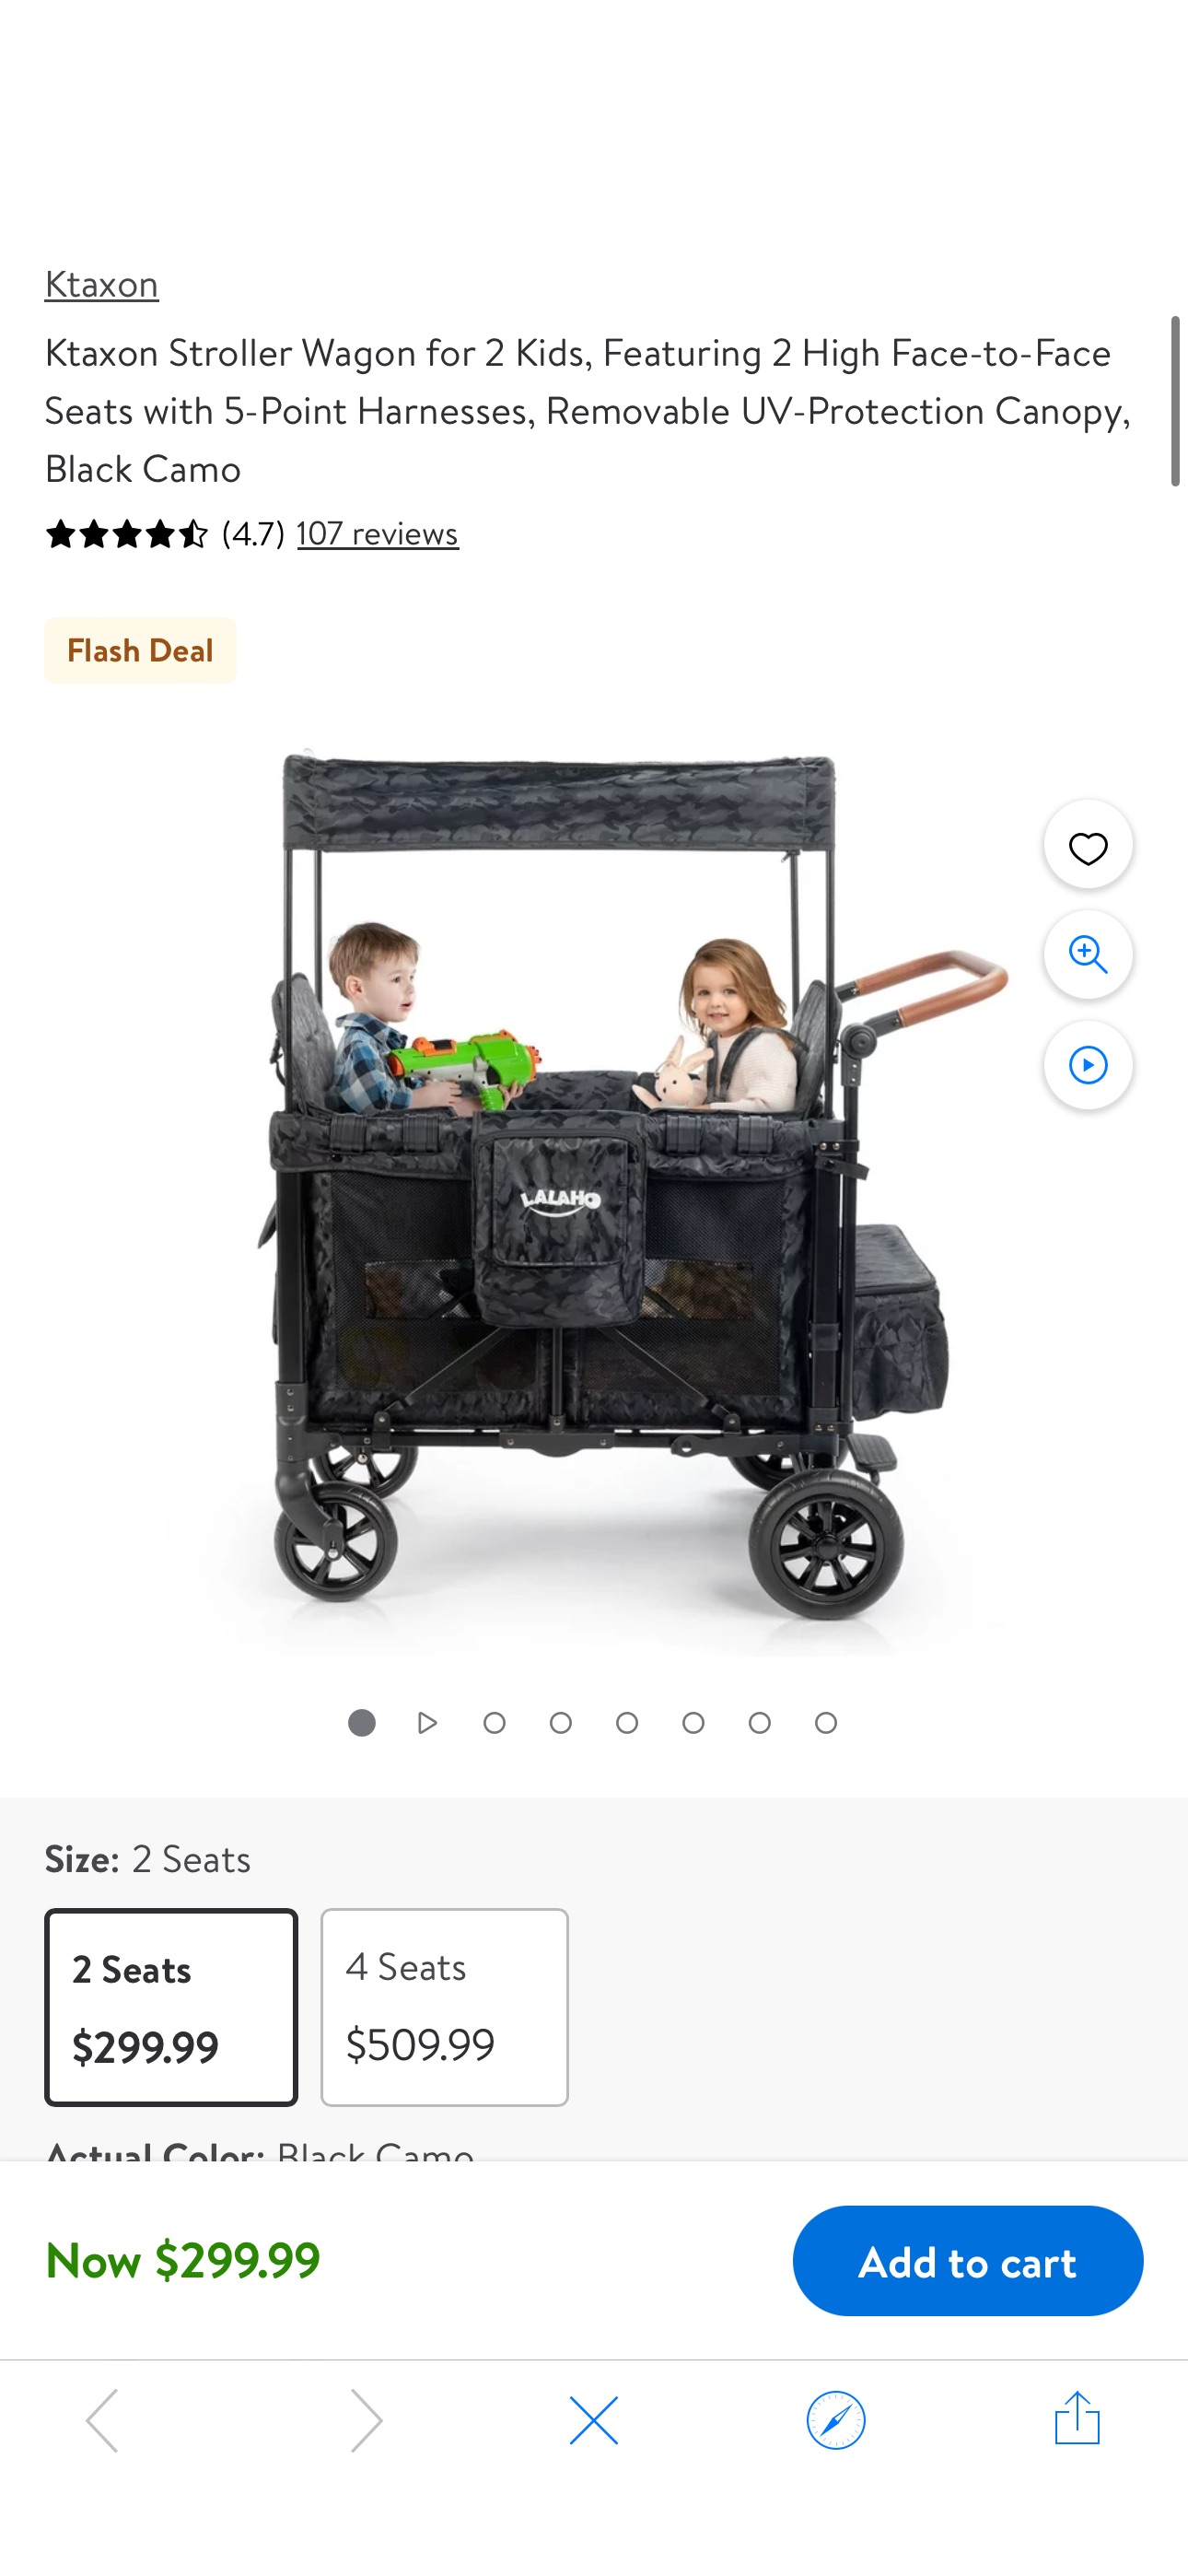 Ktaxon Stroller Wagon for 2 Kids, Featuring 2 High Face-to-Face Seats with 5-Point Harnesses, Removable UV-Protection Canopy, Black Camo - Walmart.com